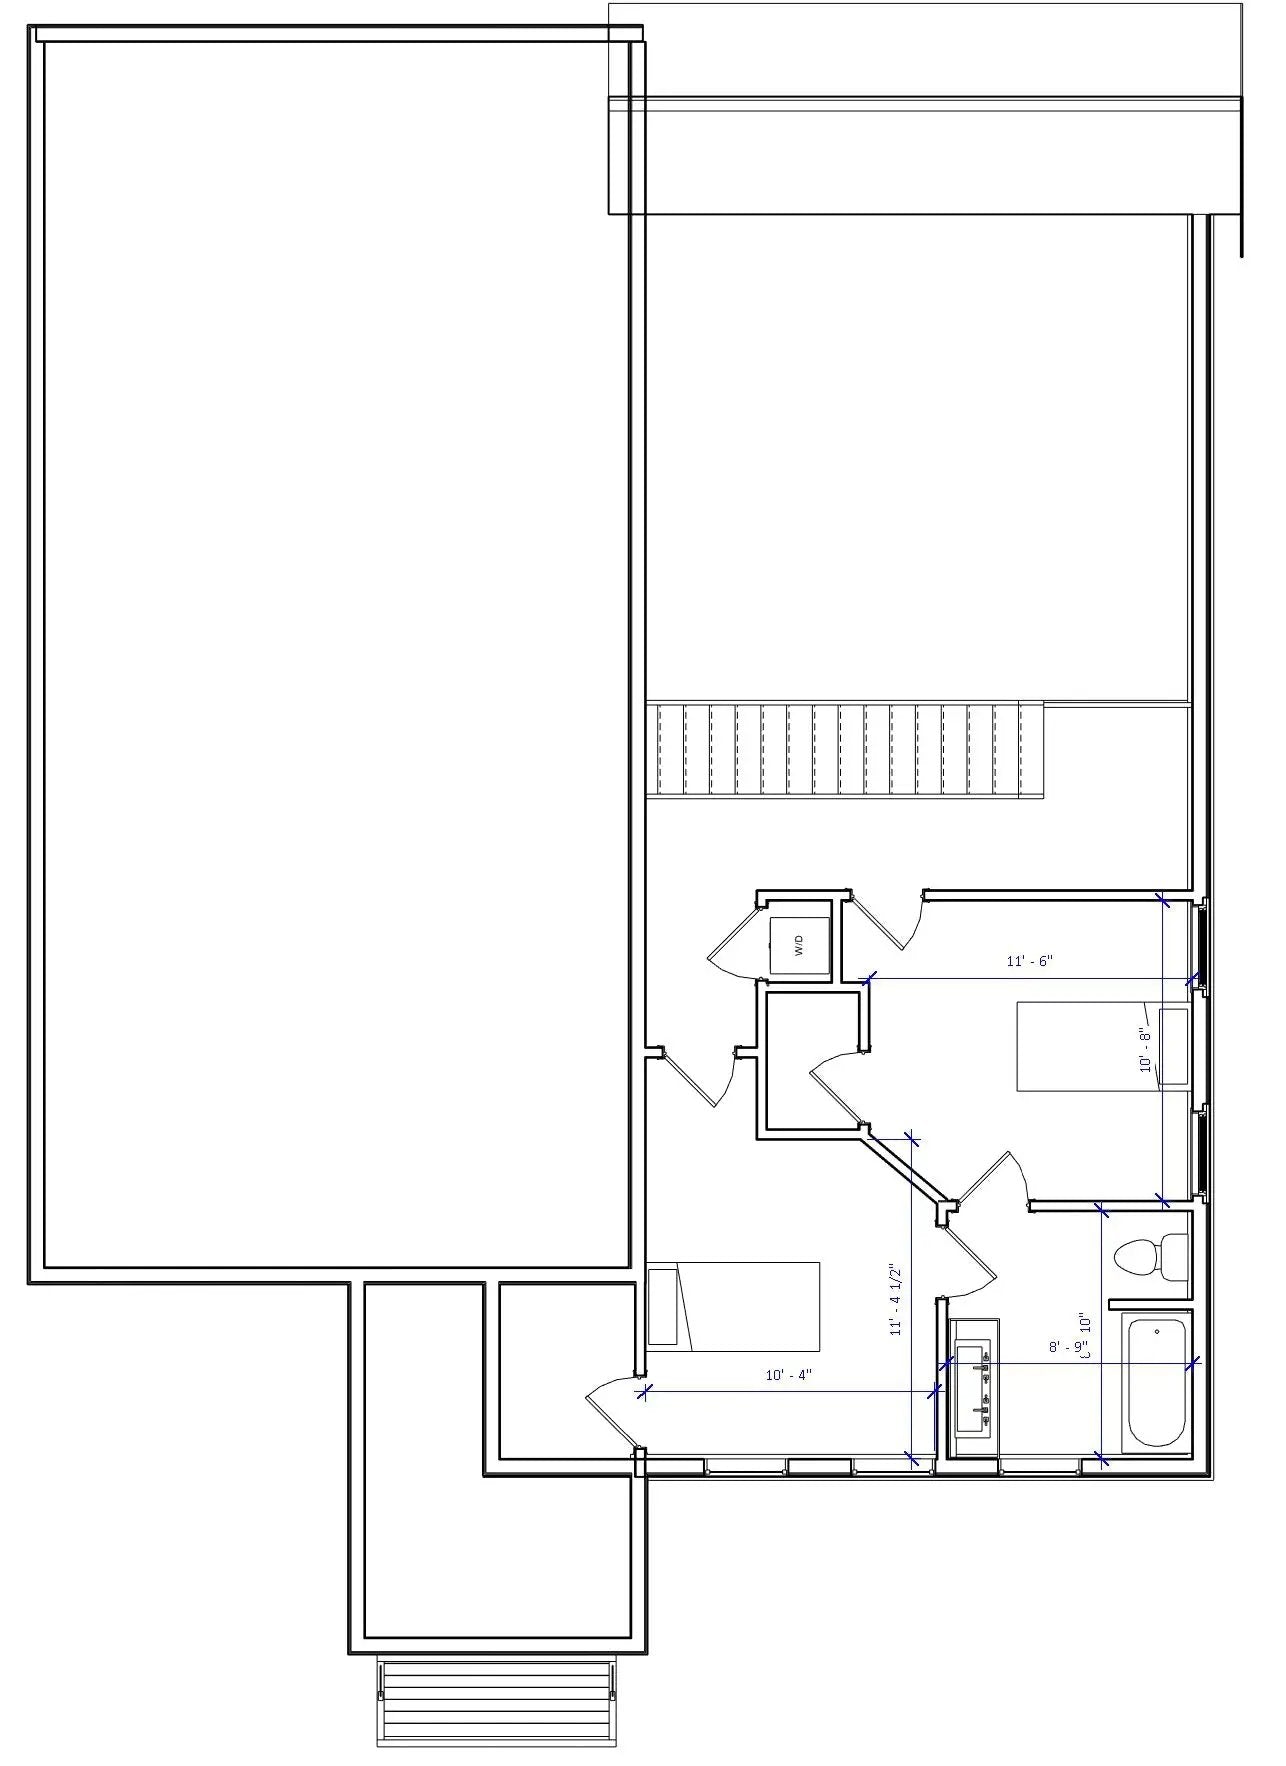 a drawing of a floor plan